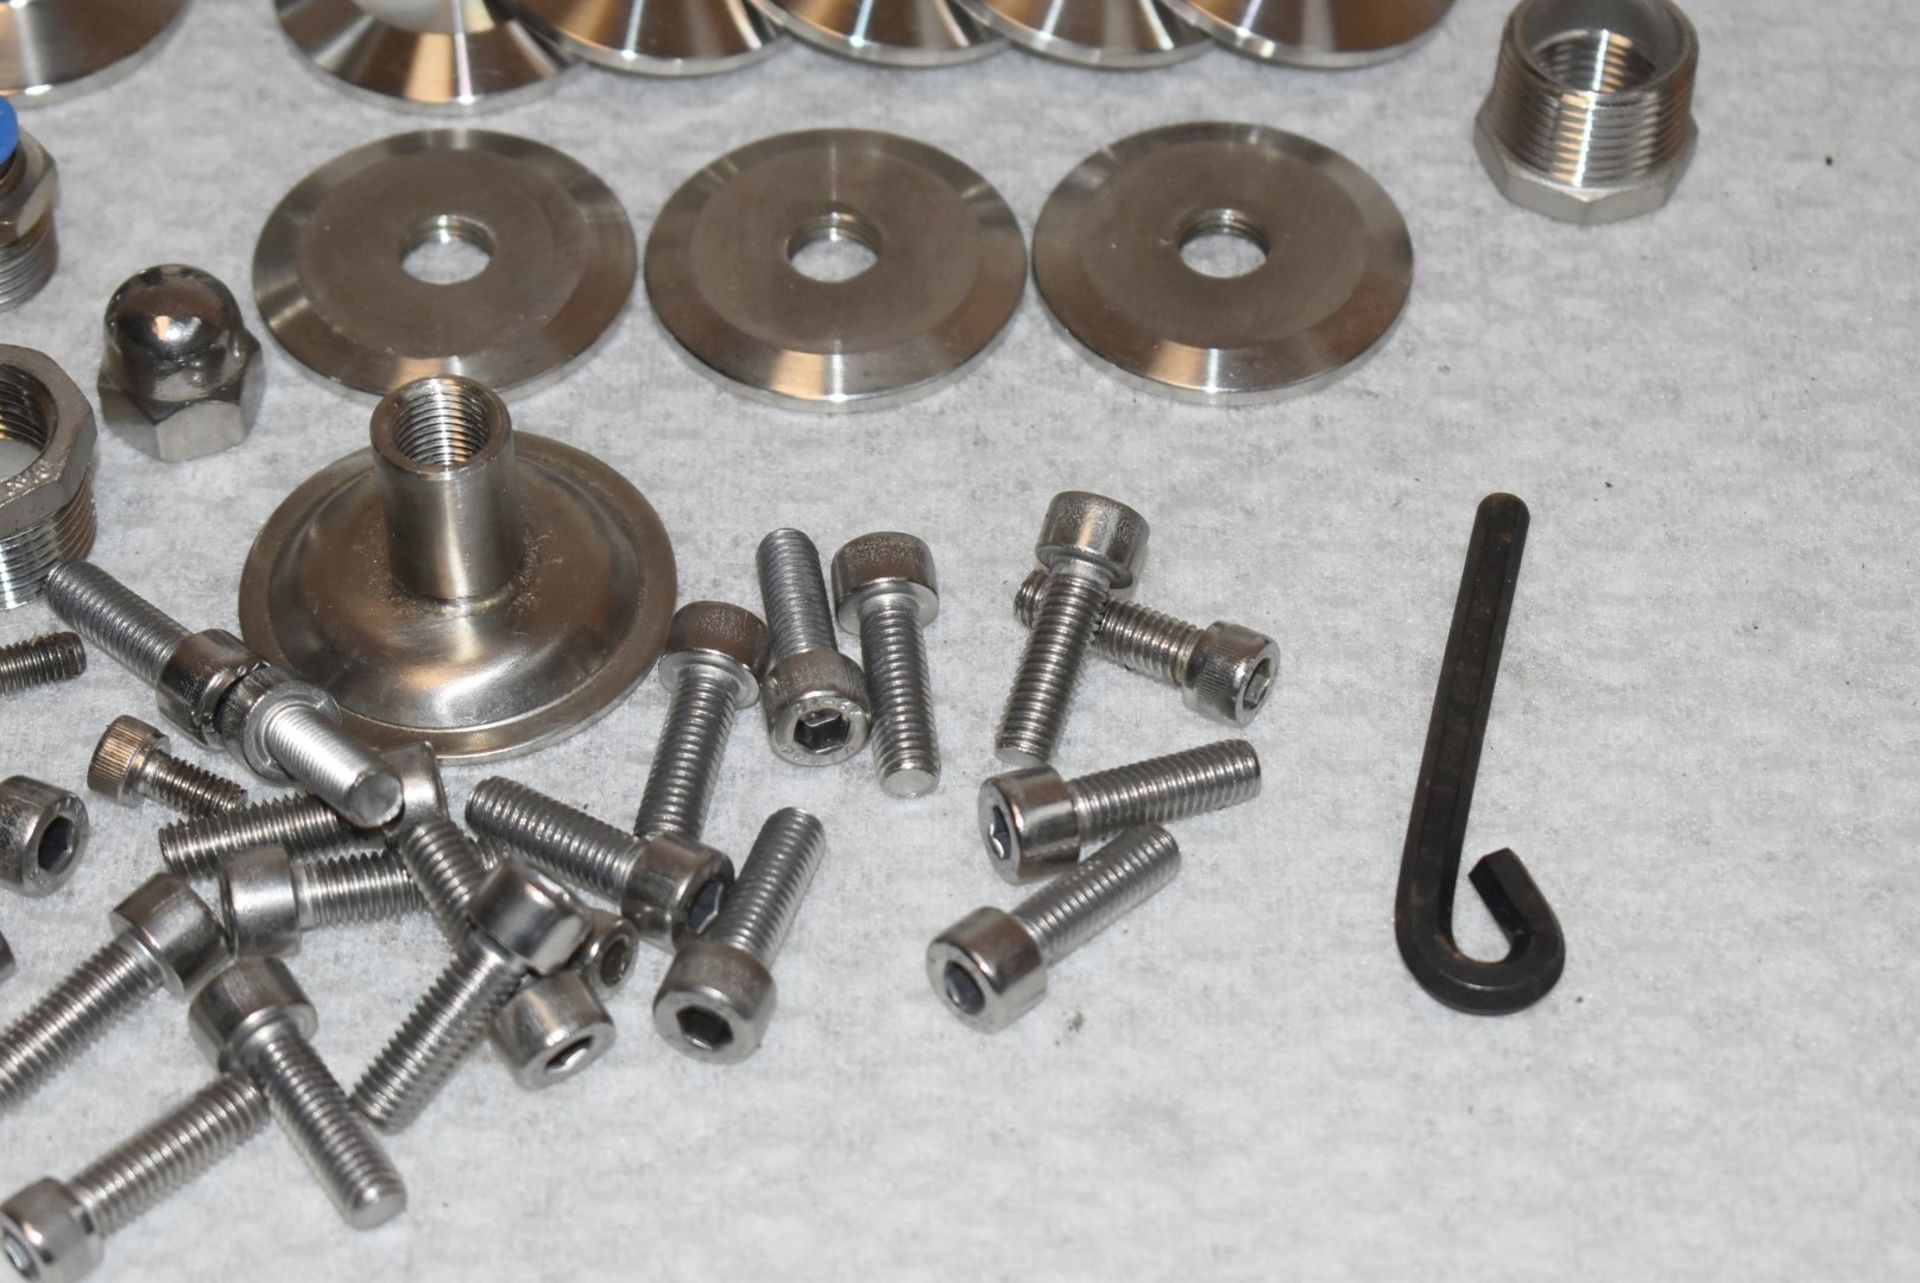 Assorted Job Lot of Stainless Steel Fittings For Brewery Equipment - Includes Approx 70 Pieces - - Image 10 of 14